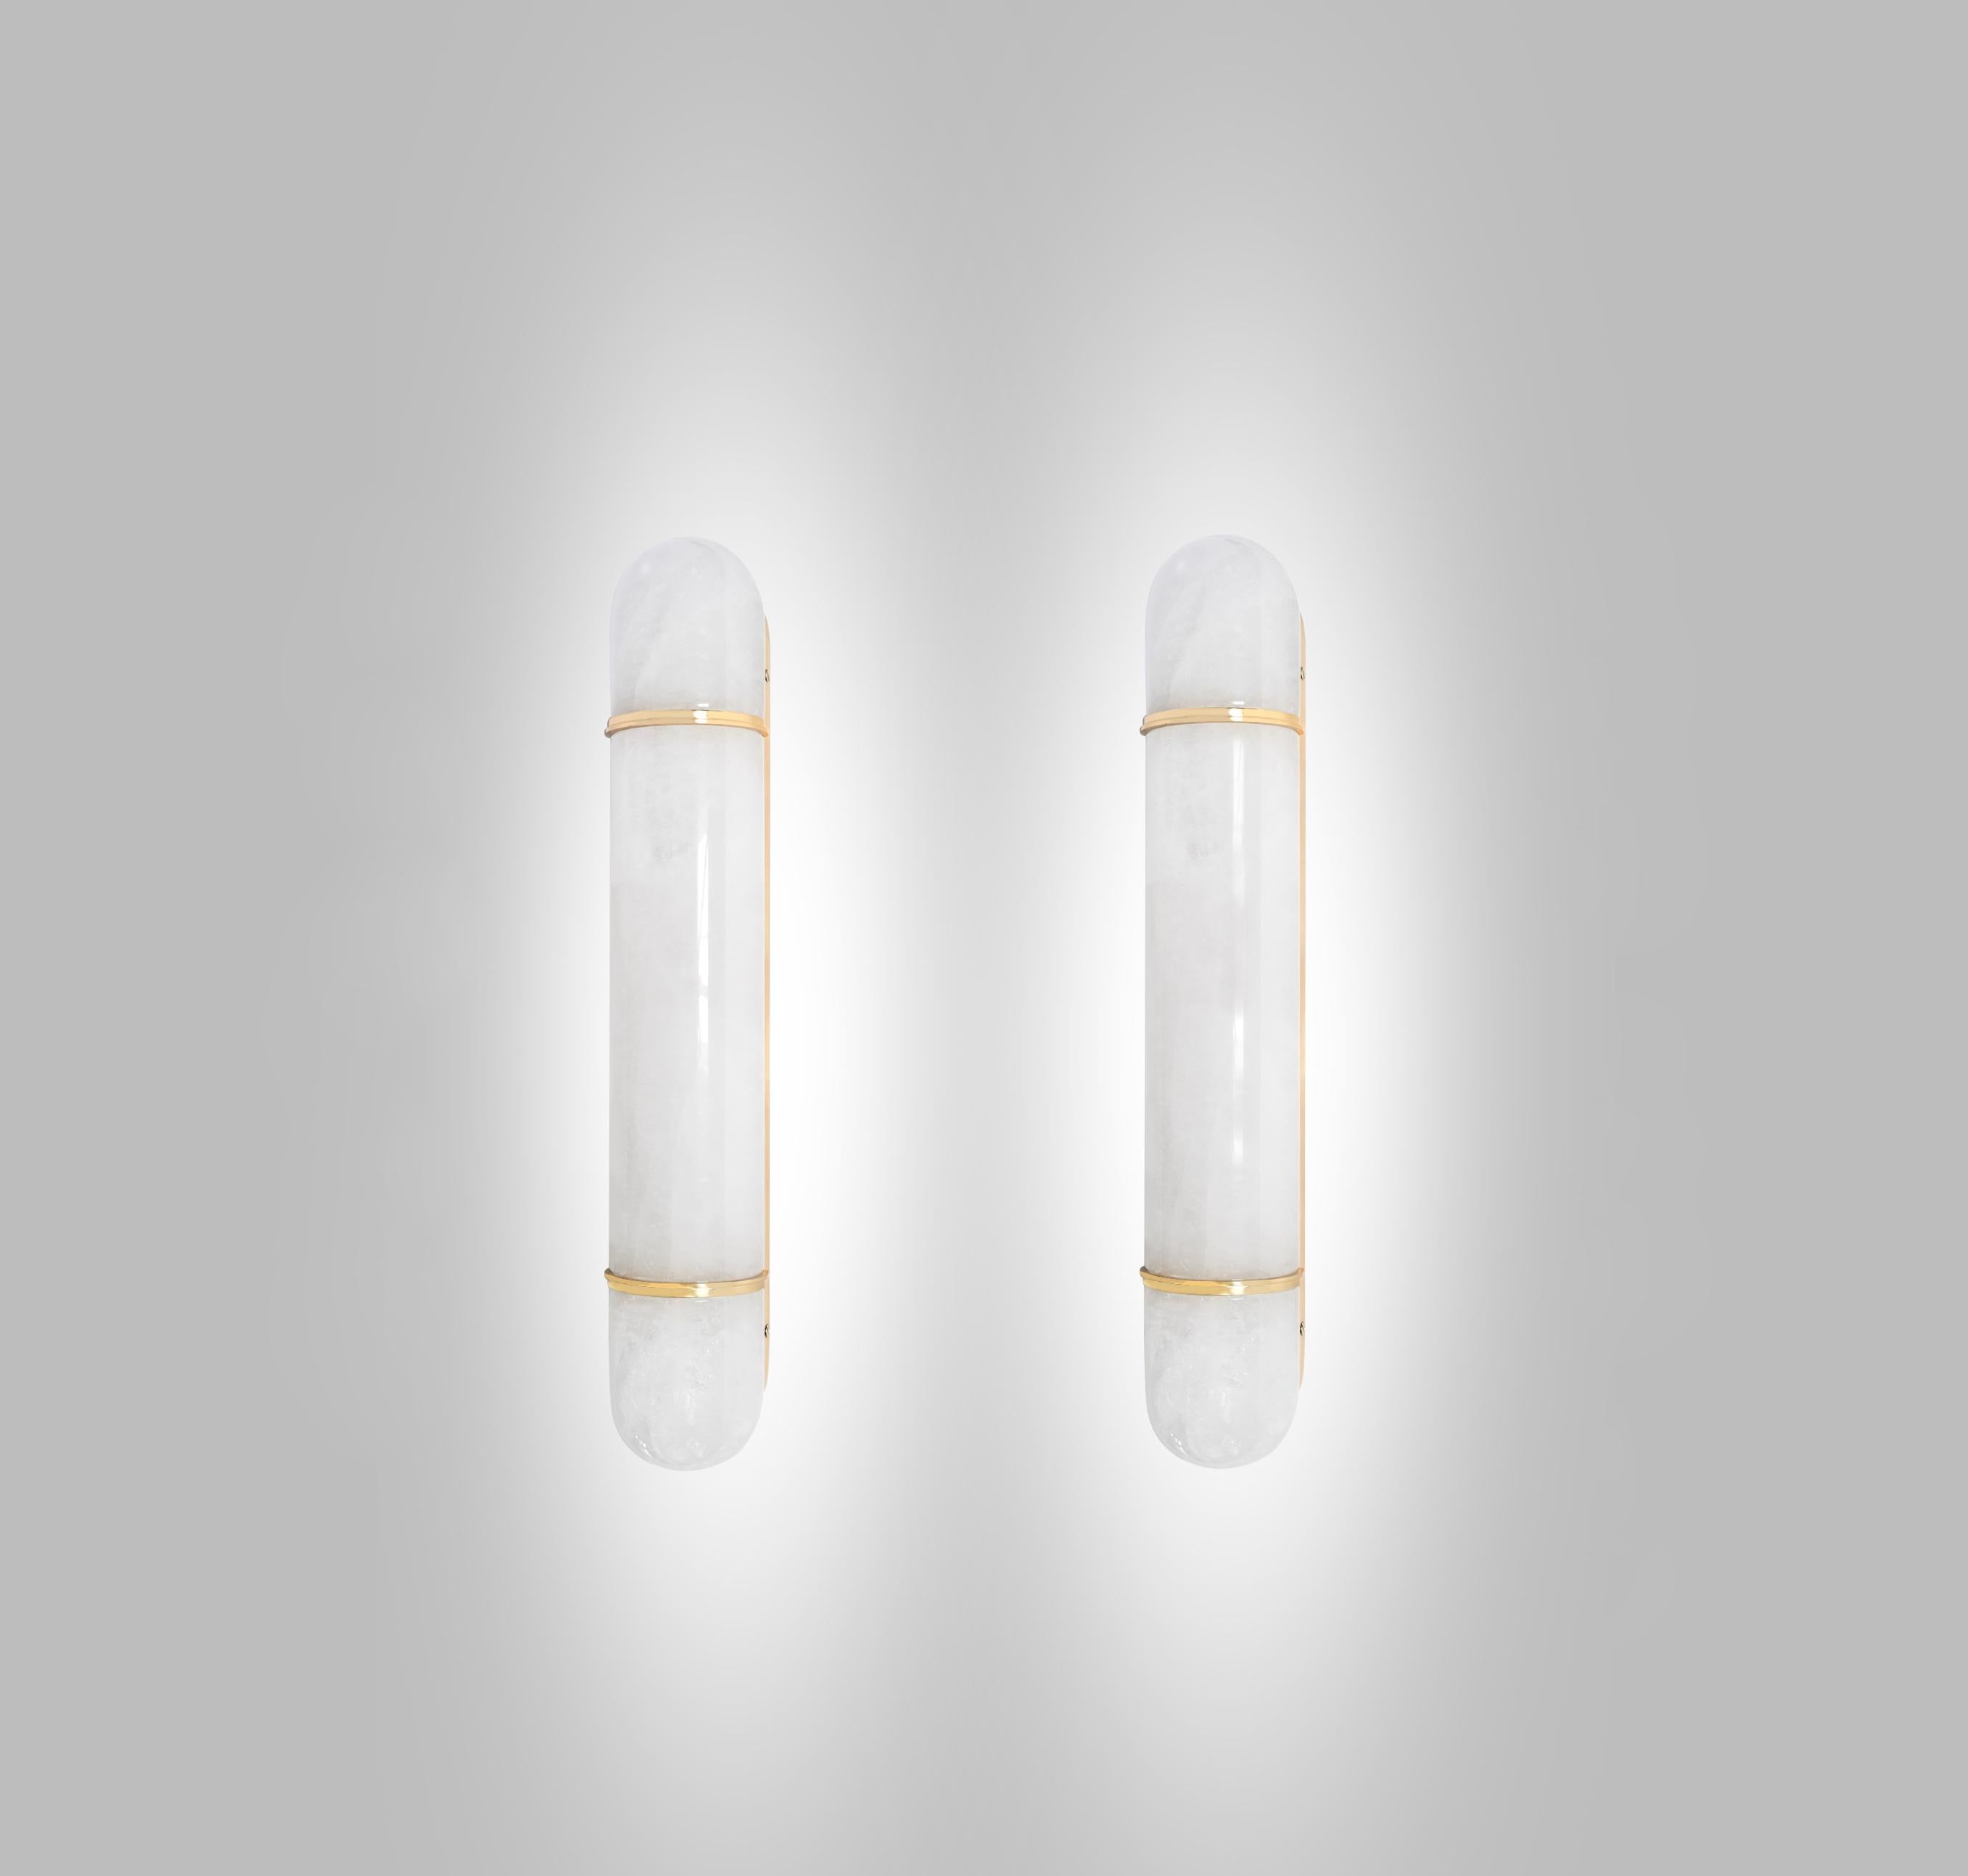 Pair of finely carved rock crystal sconces with the aged brass decoration. Created by Phoenix Gallery, NYC.
Each sconce installs four sockets. Use candelabra lights. 60watts each LED bulb, 240w total.